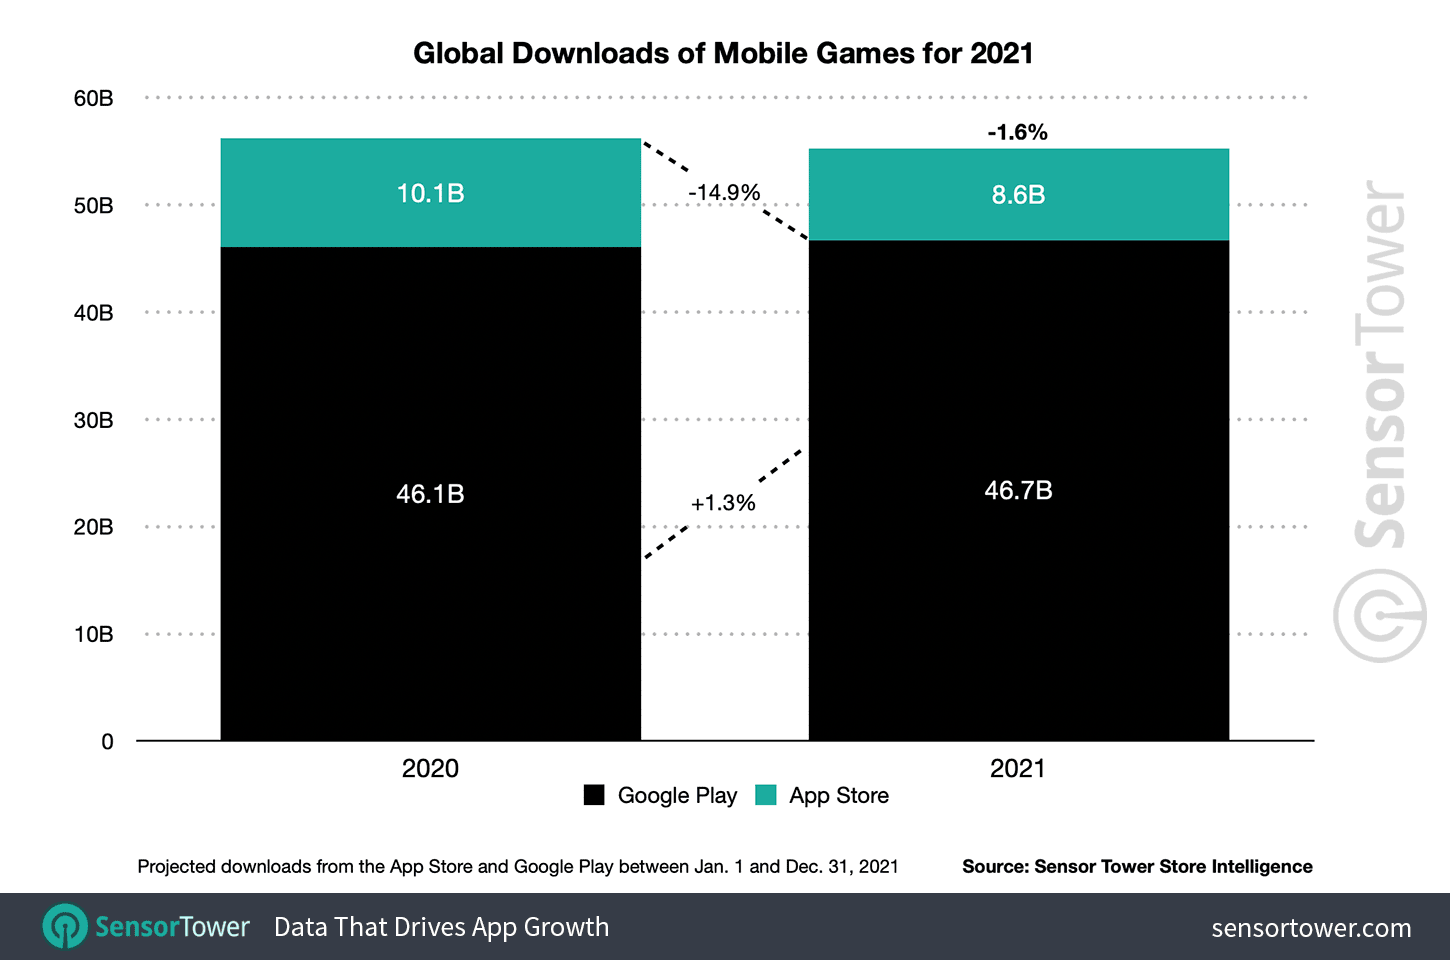 Worldwide downloads of mobile games fell 1.6 percent to 55.3 billion in 2021.